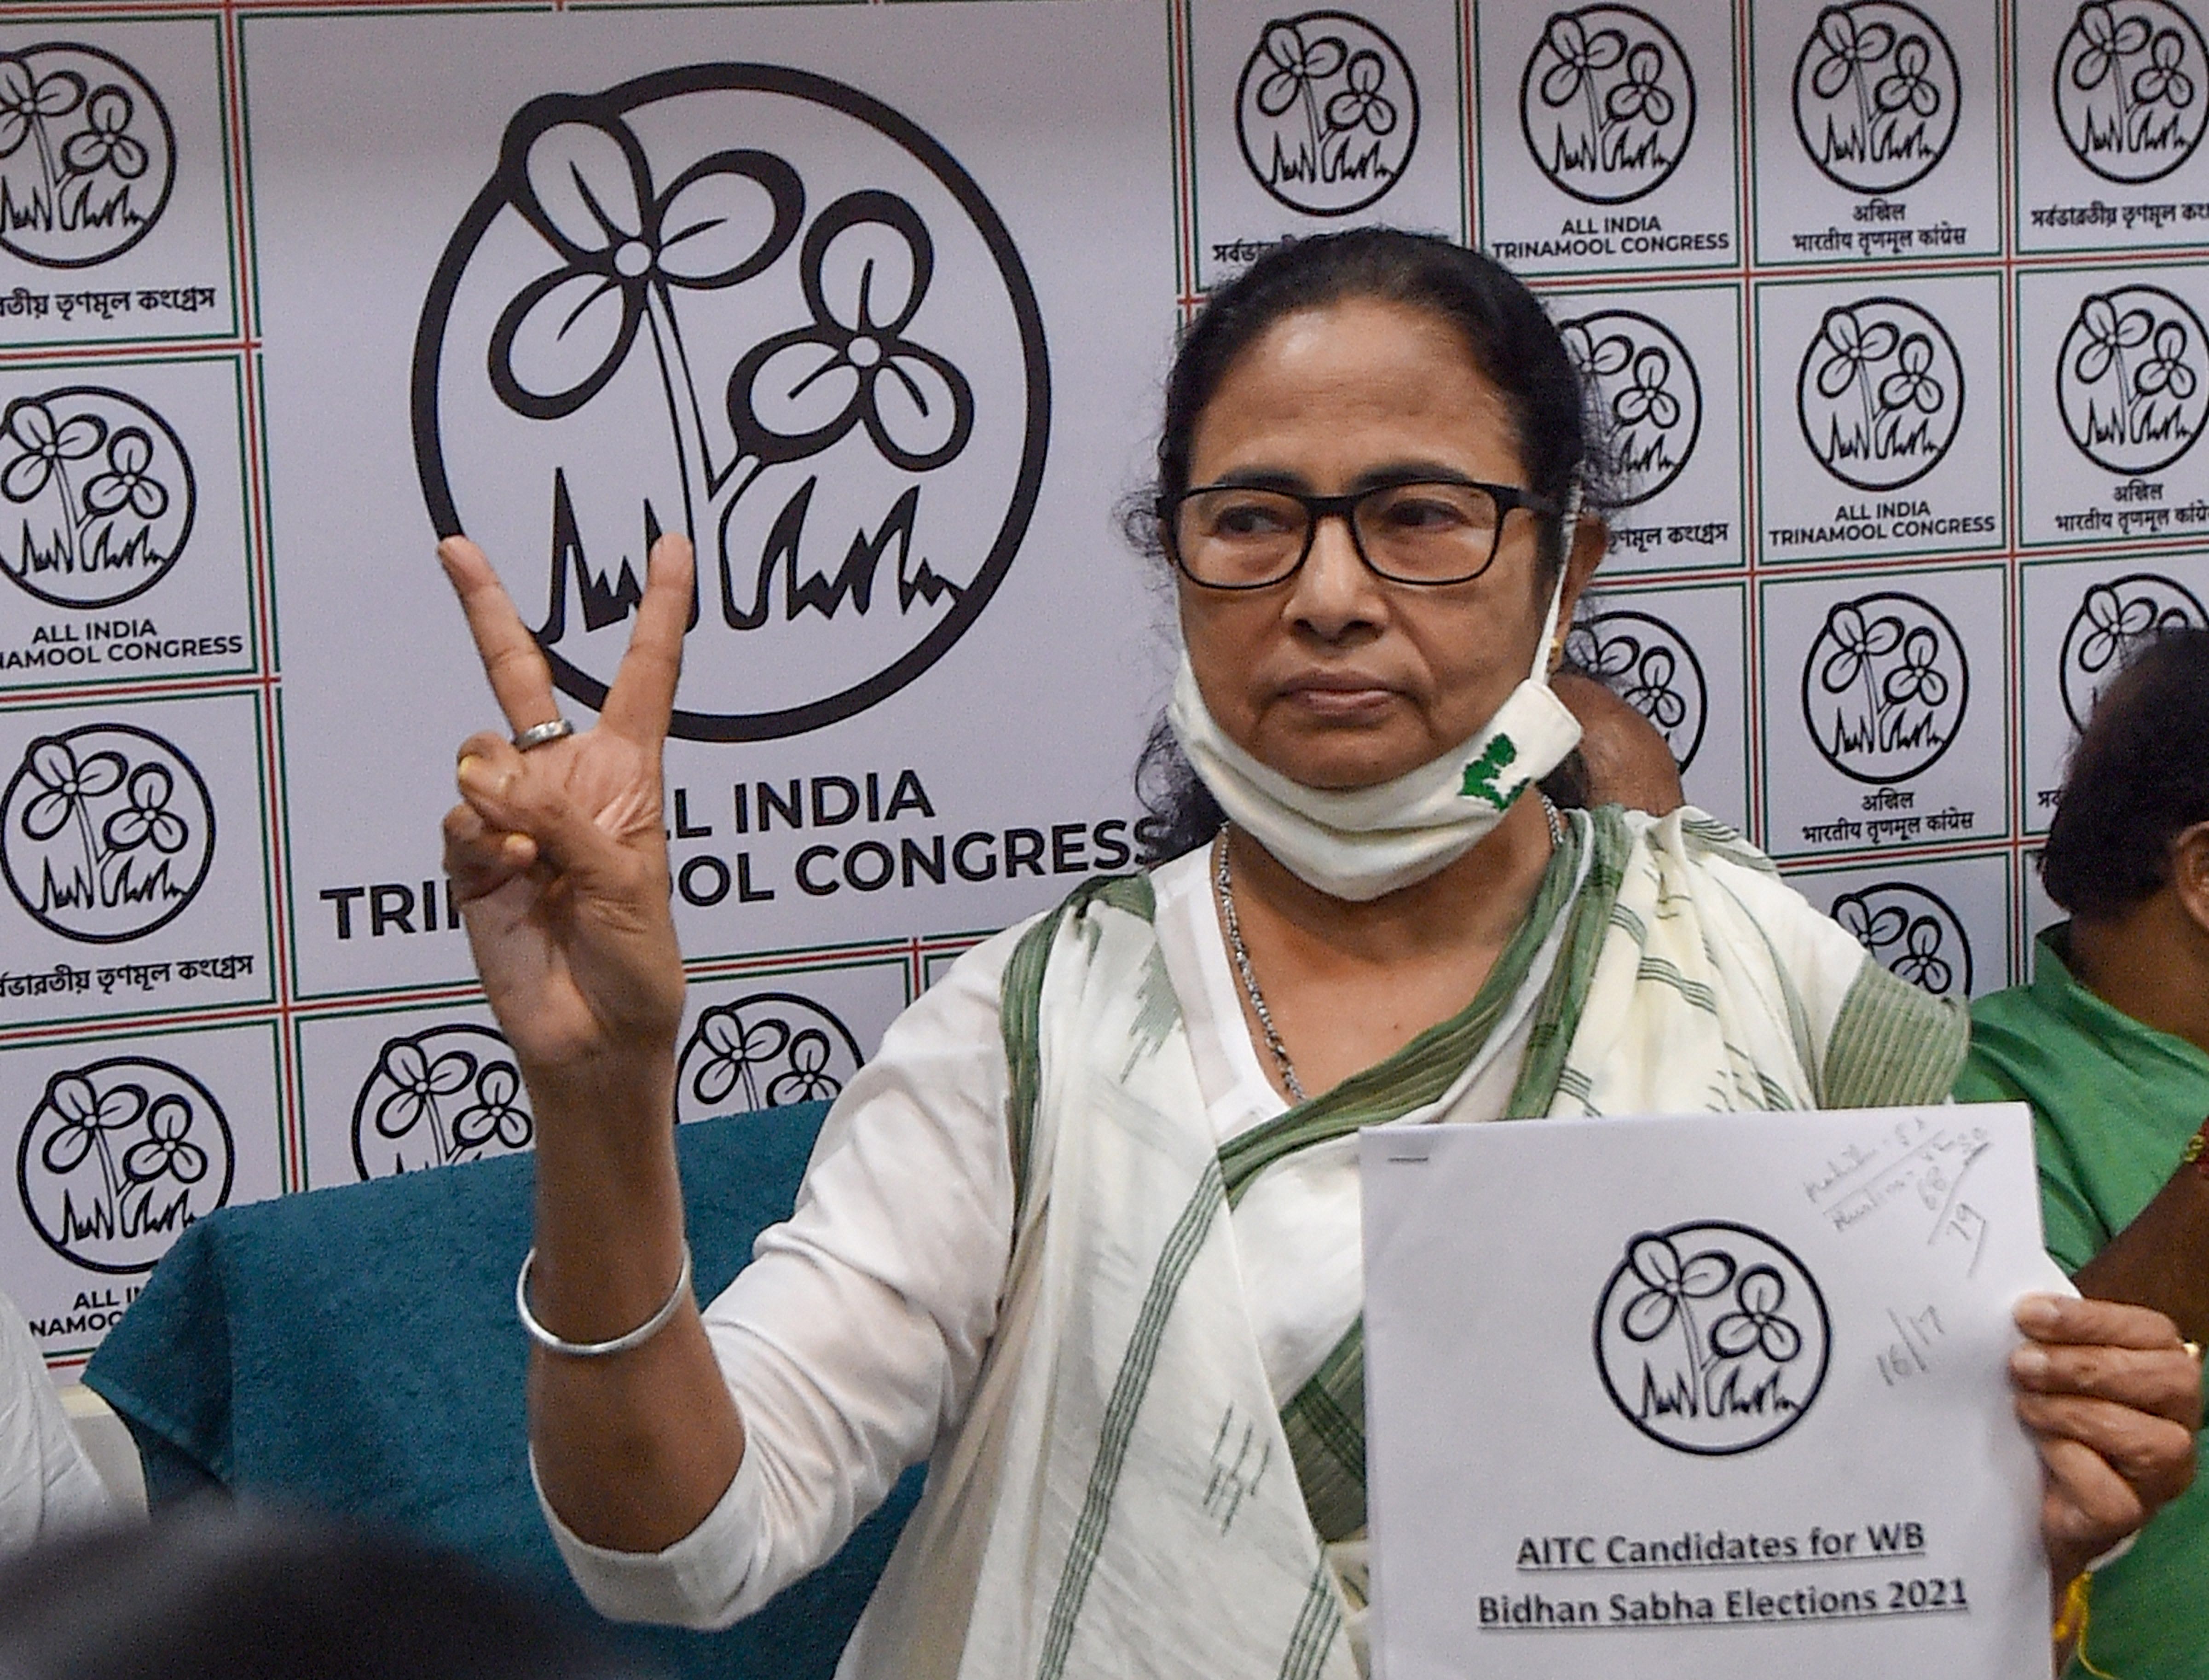 Mamata Banerjee flashes a victory sign with the list of electoral candidates at Trinamool Congress party office. Credit: PTI Photo